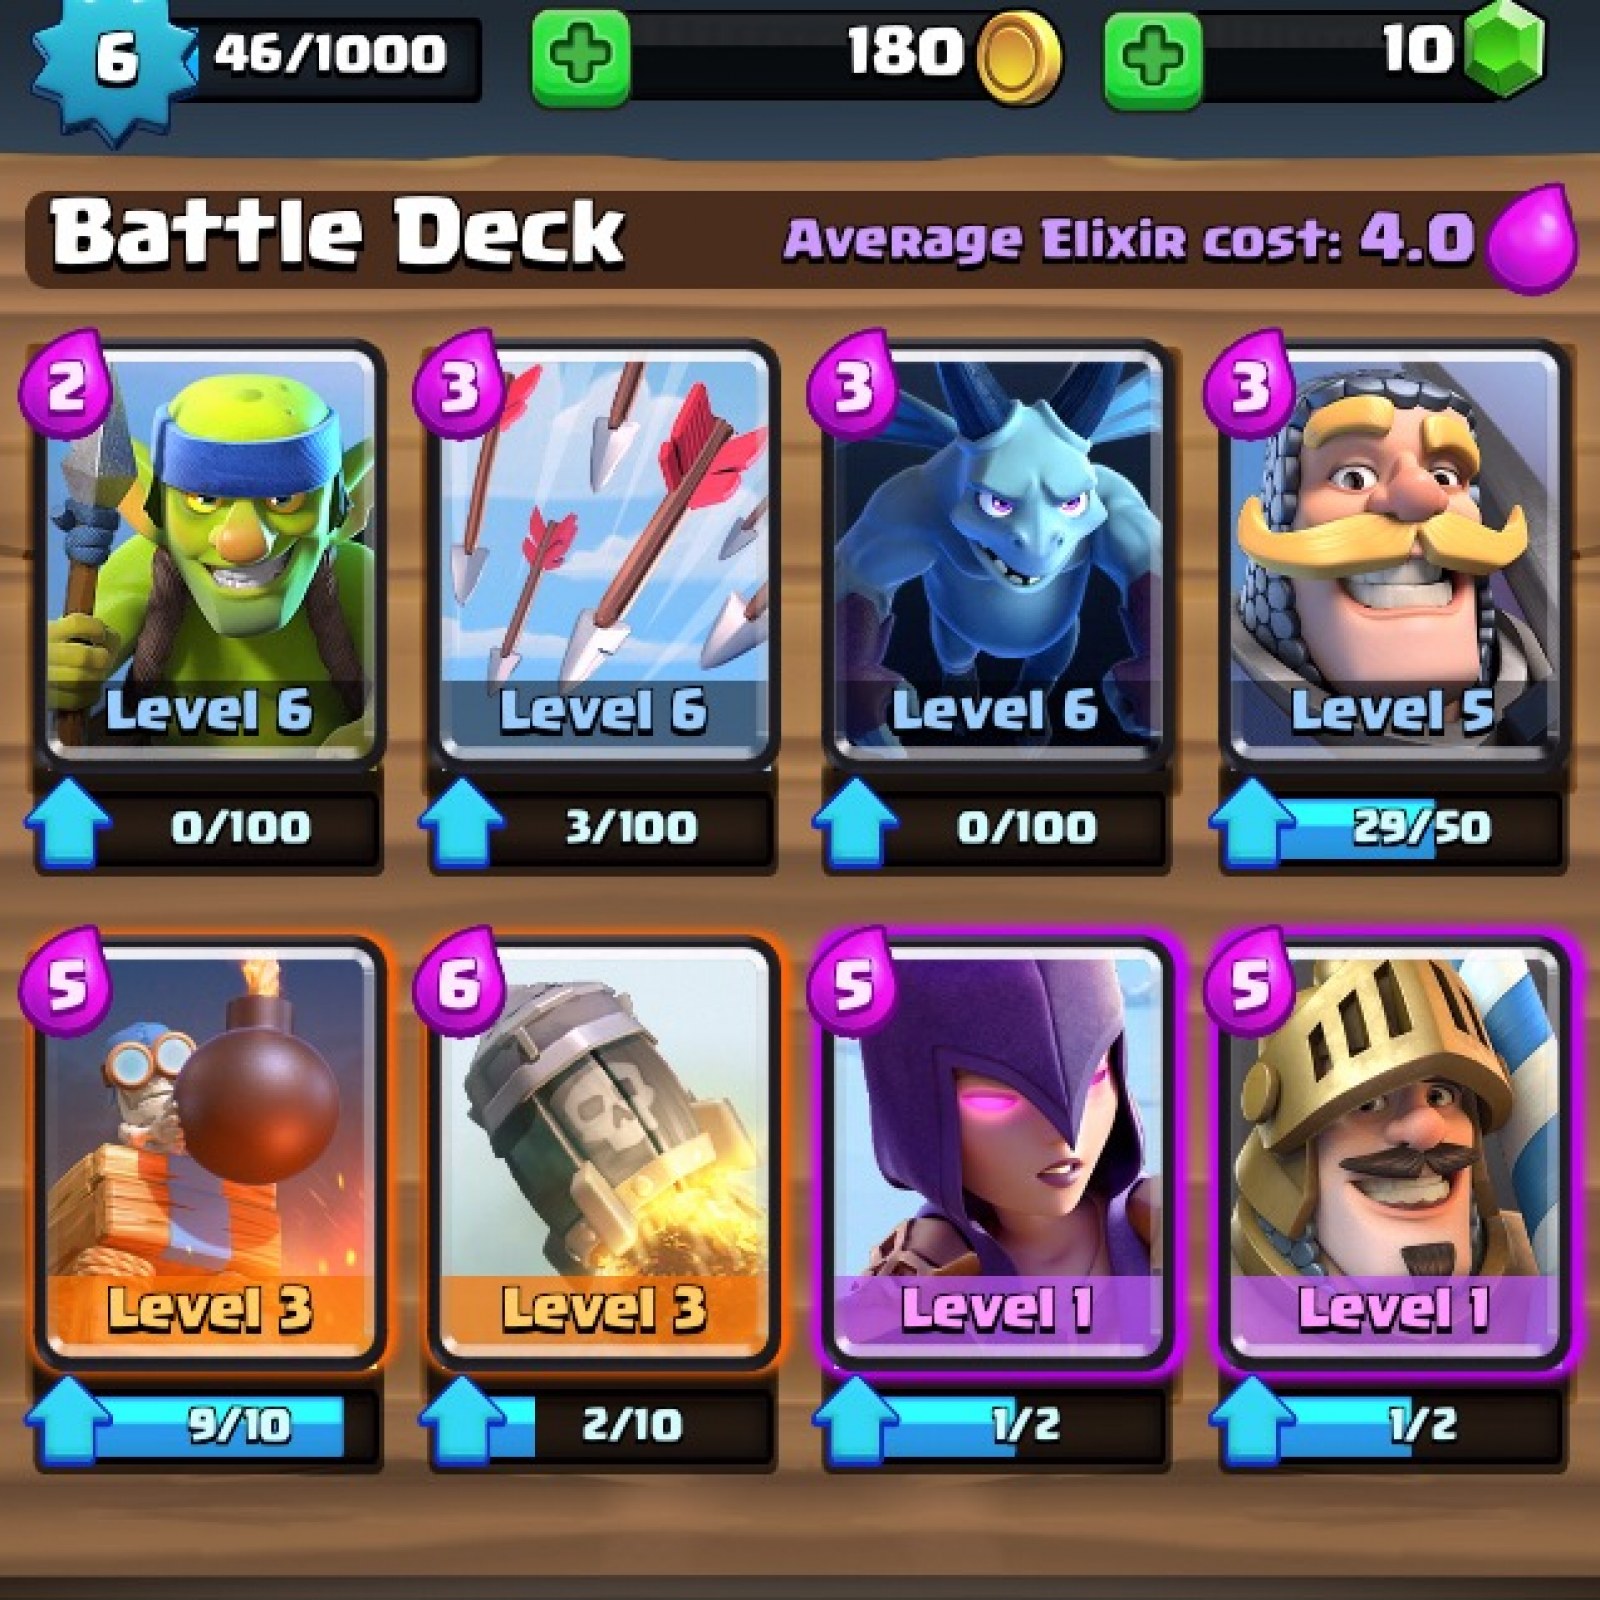 Clash Royale: The best common, rare and epic cards to mix up the